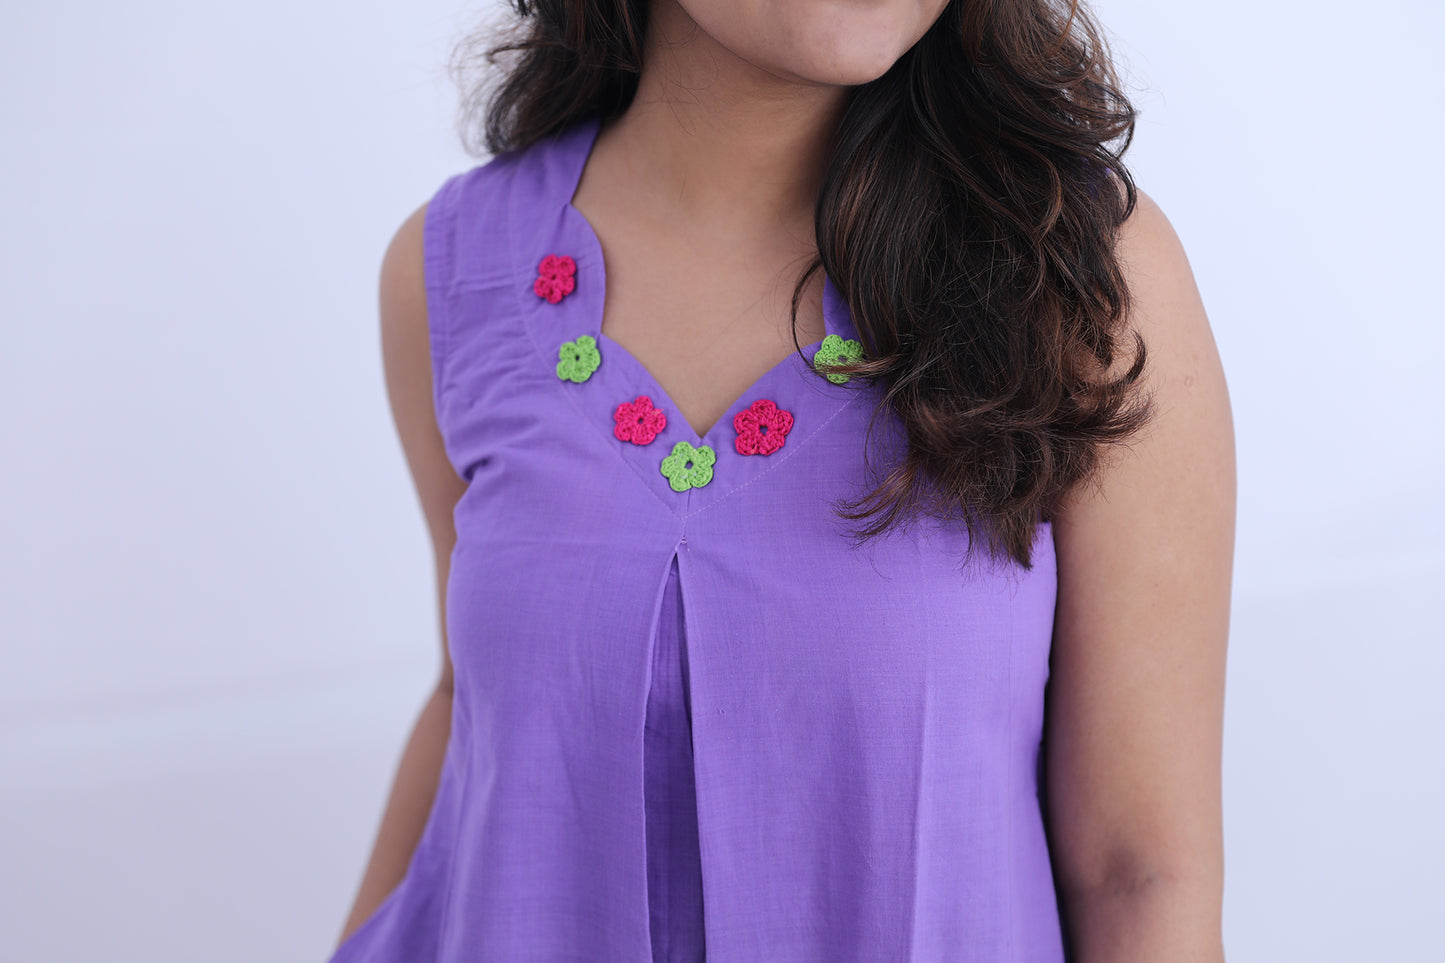 Candy crush purple dress with crochet details